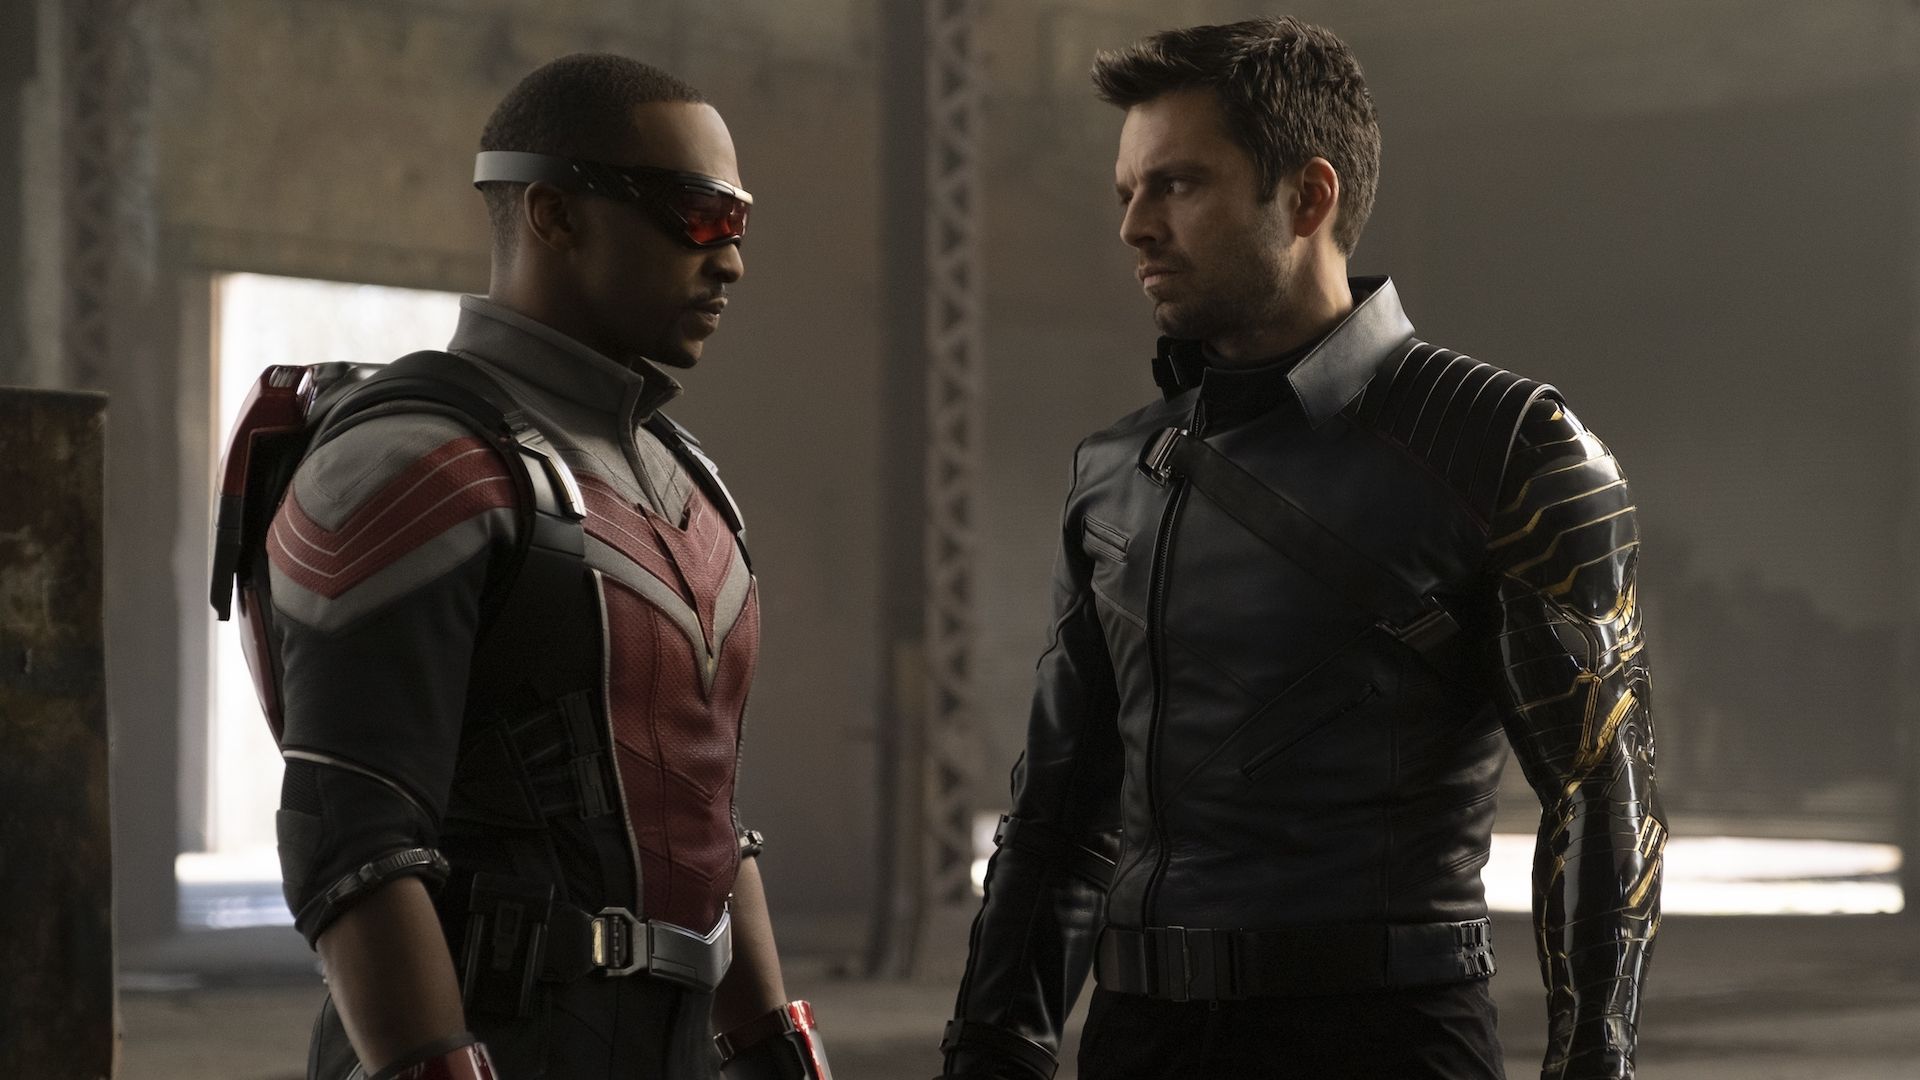 Early 'The Falcon And The Winter Soldier' Reactions Praise The Show's Exploration Of Fan Favorites